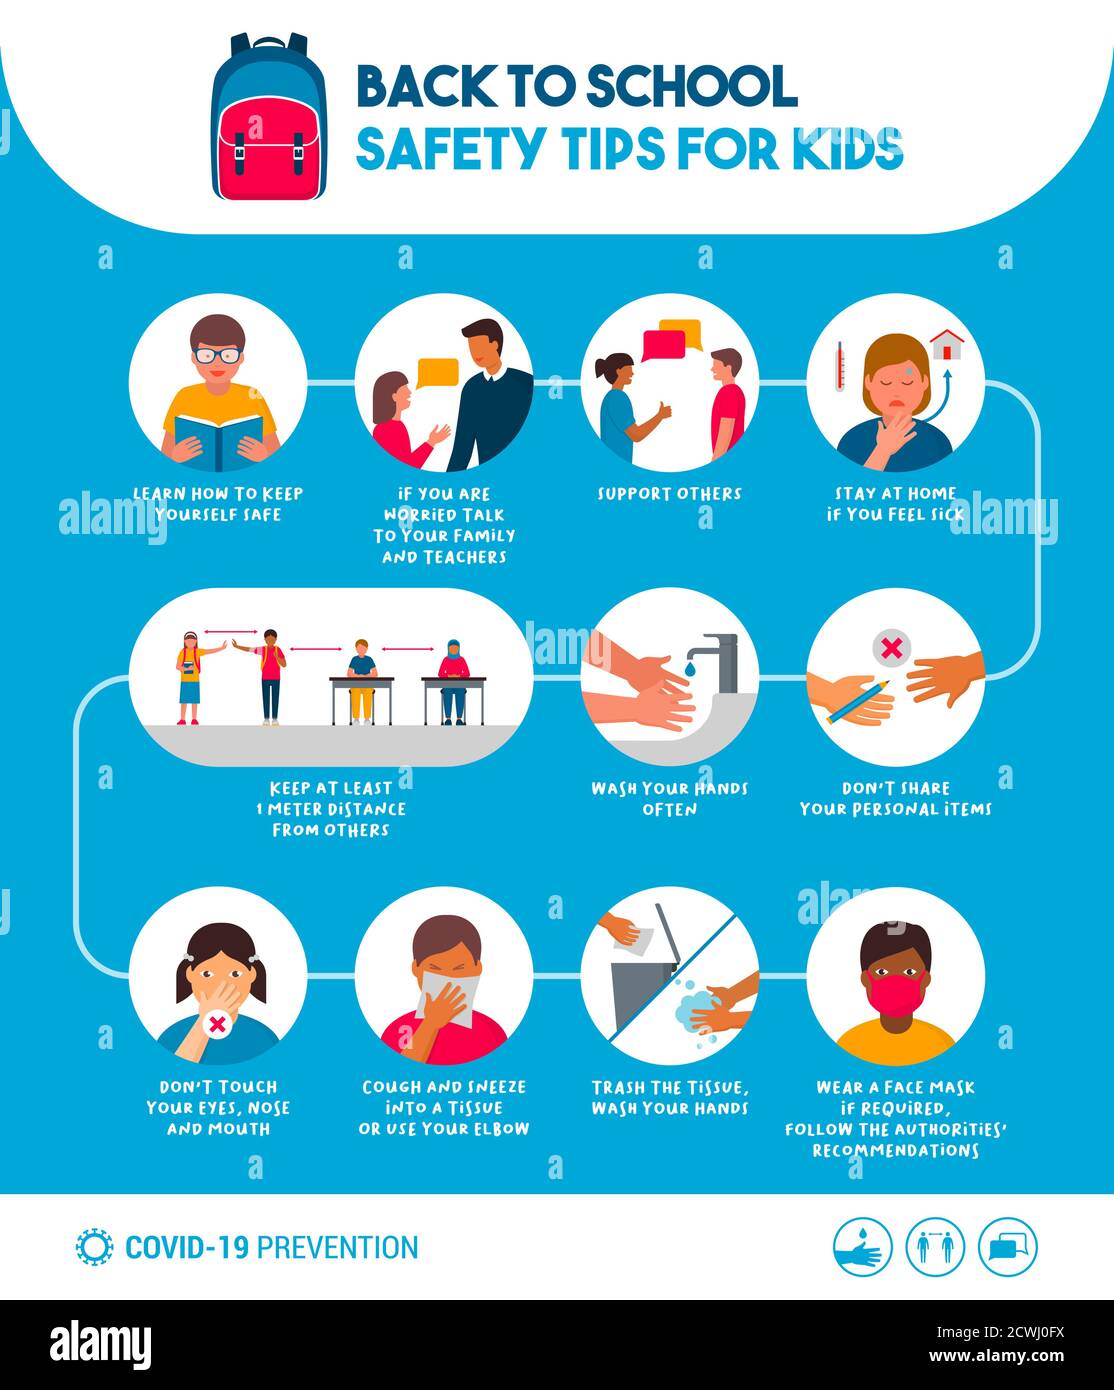 Back to school safety tips for kids poster: hygiene, social distancing and educational tips to prevent coronavirus covid-19 spread Stock Vector